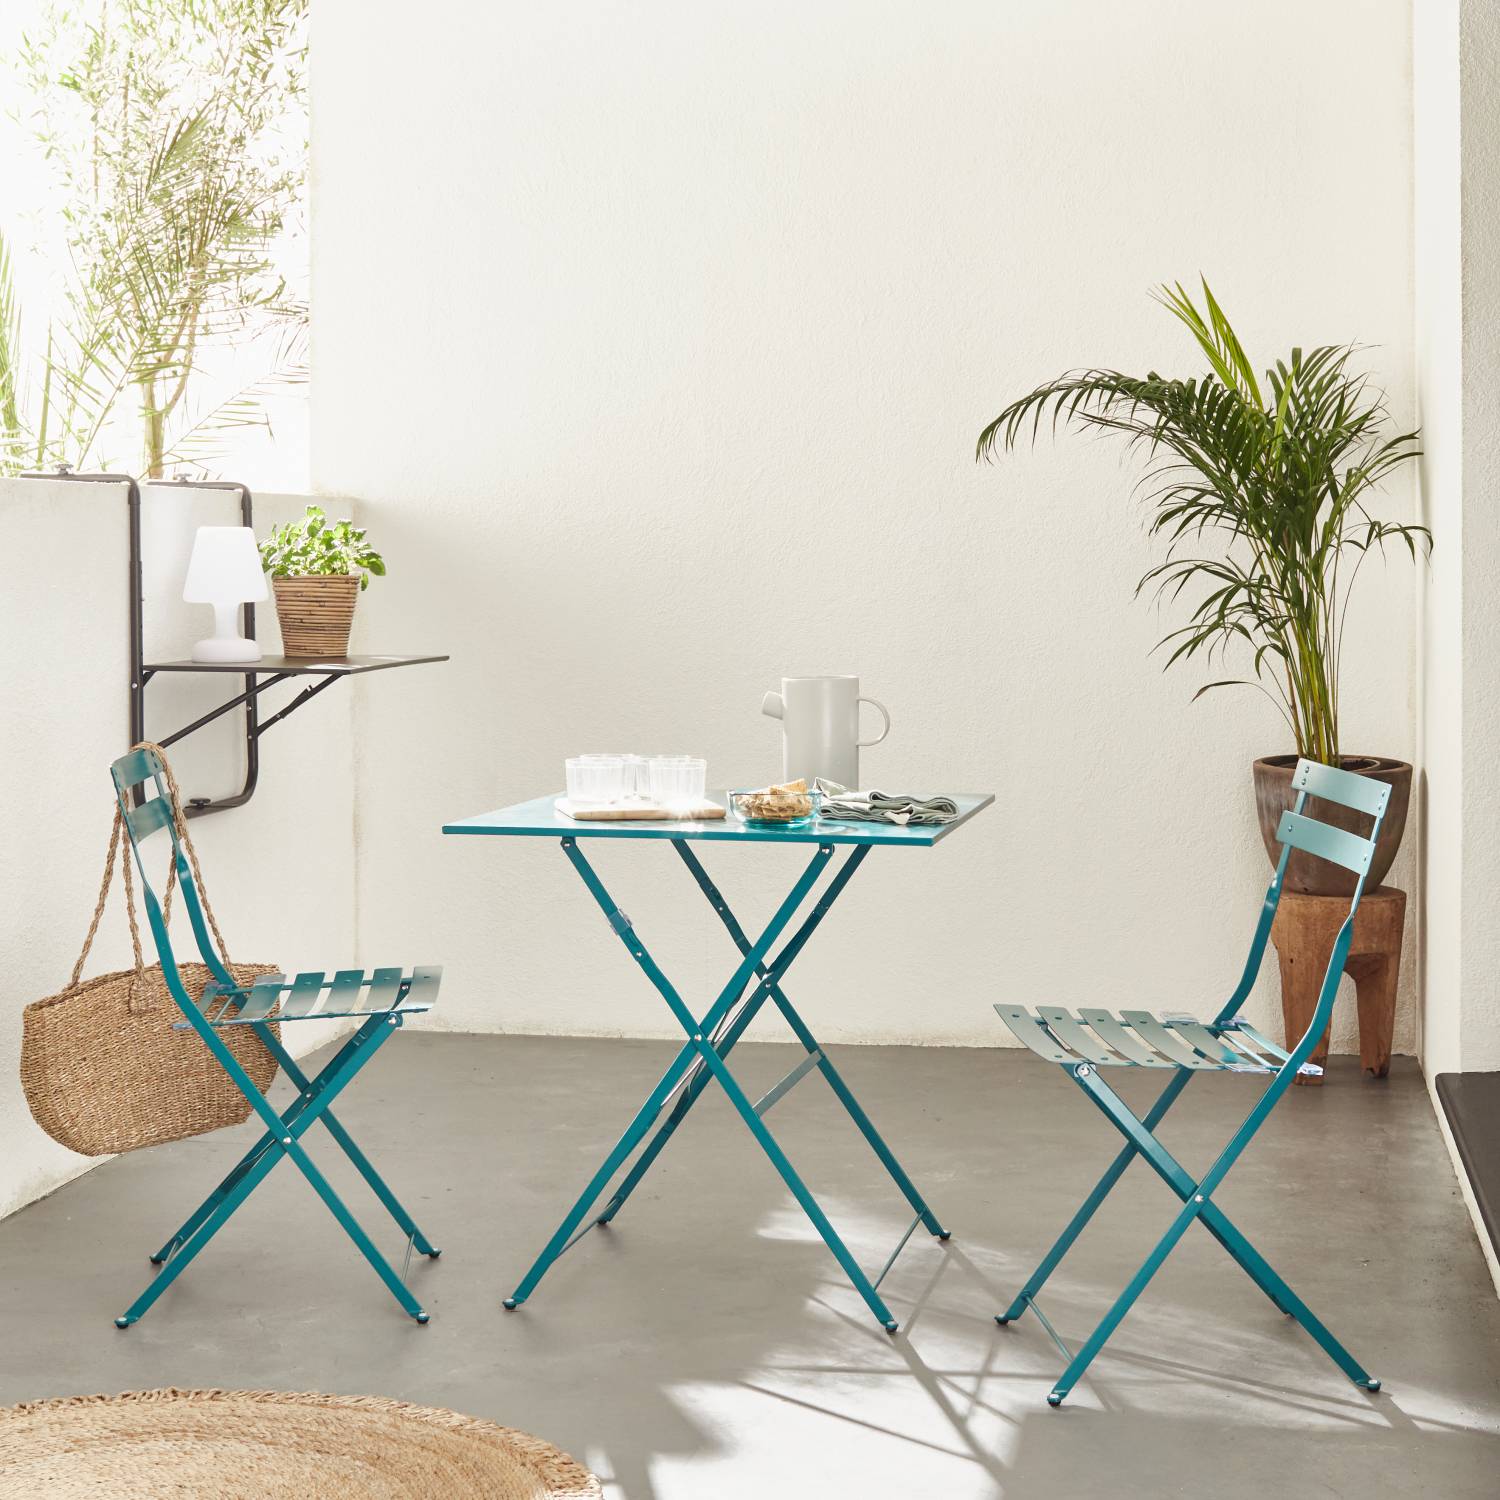 2-seater foldable thermo-lacquered steel bistro garden table with chairs, 70x70cm, Duck Blue | sweeek